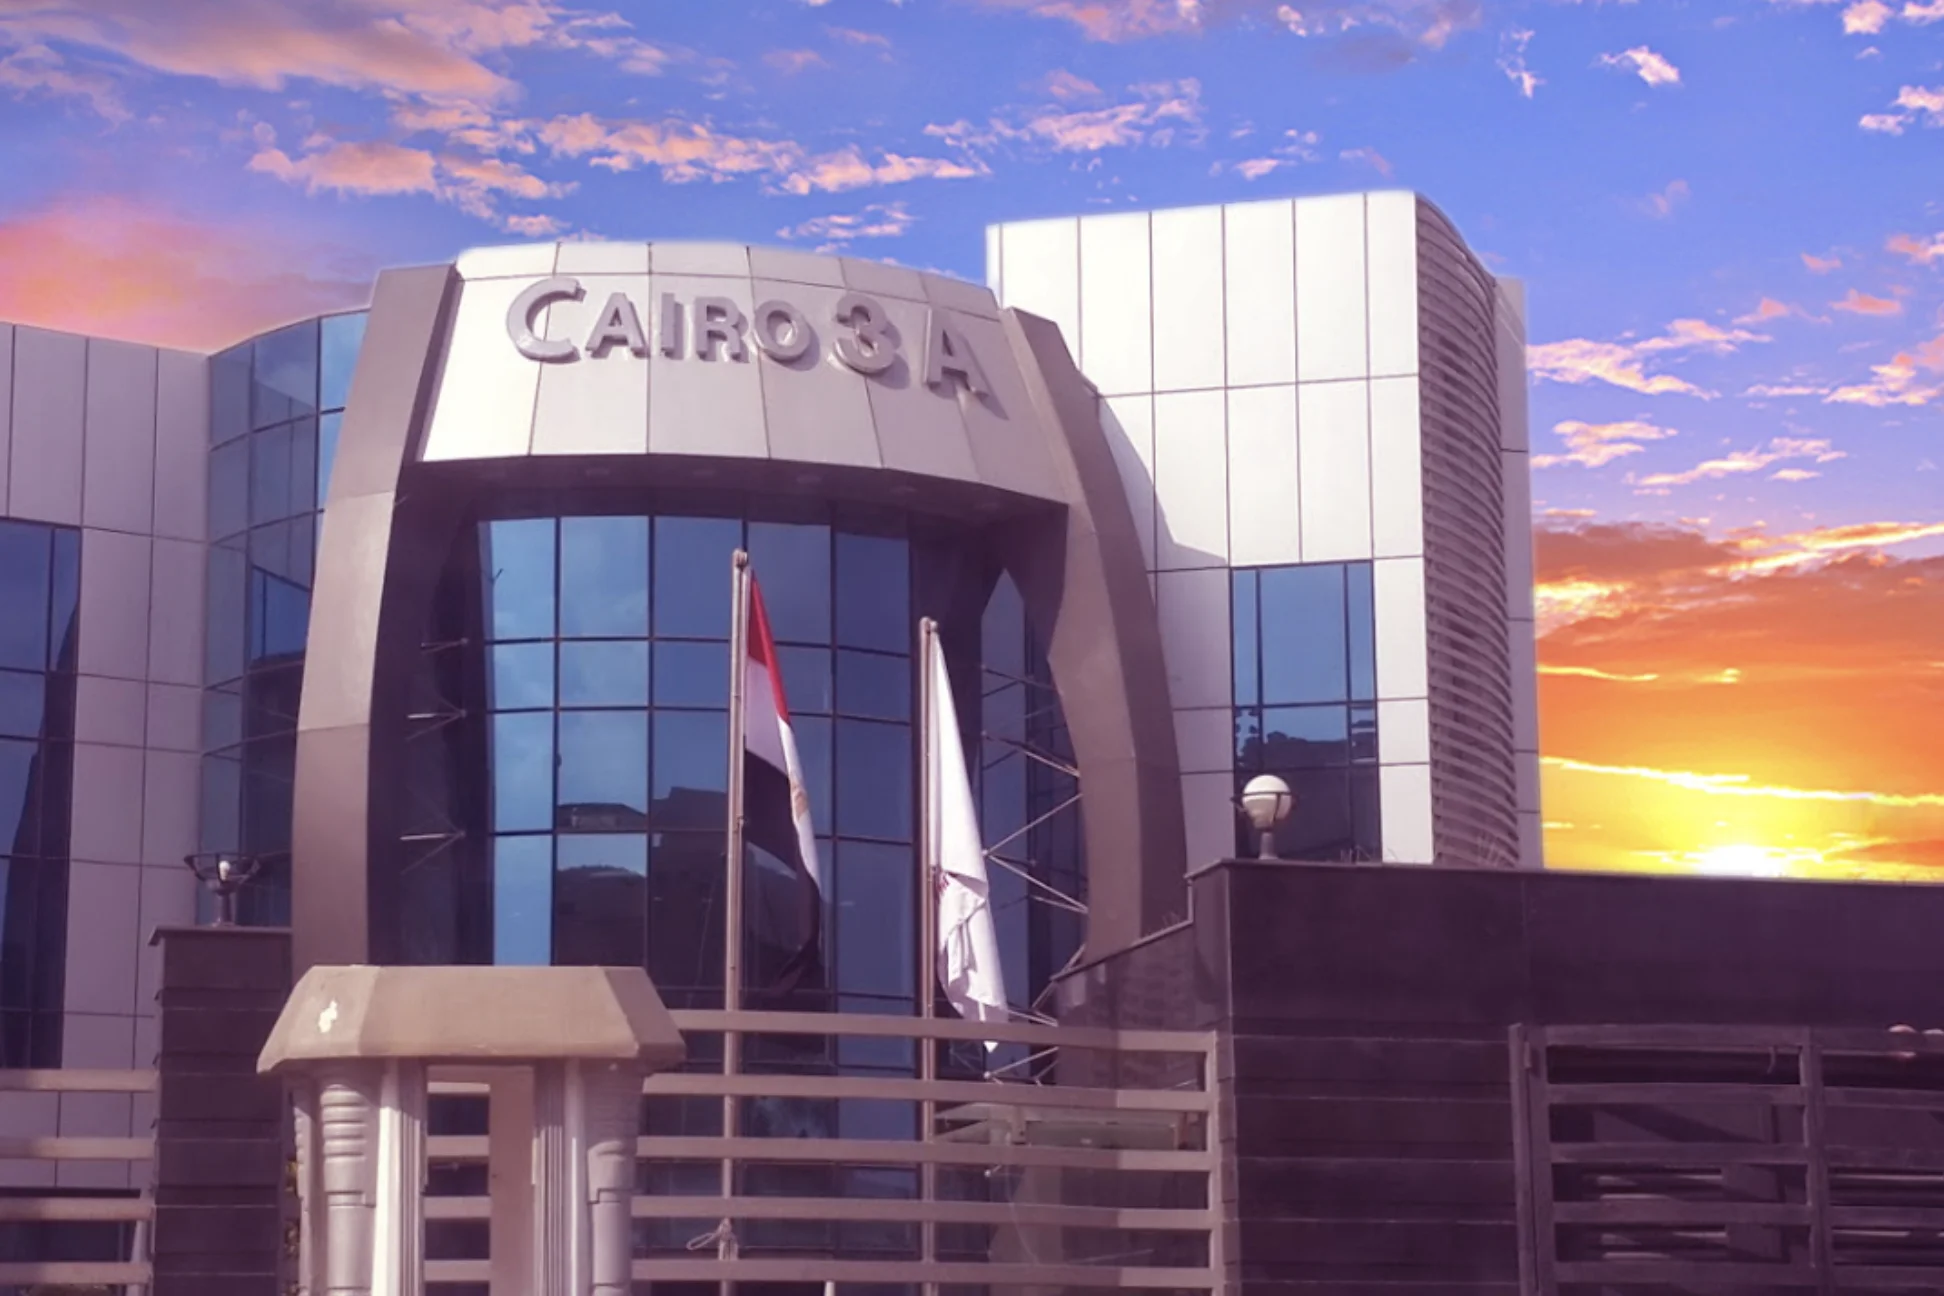 "Cairo 3A" launches CSR campaign and supports the neediest groups